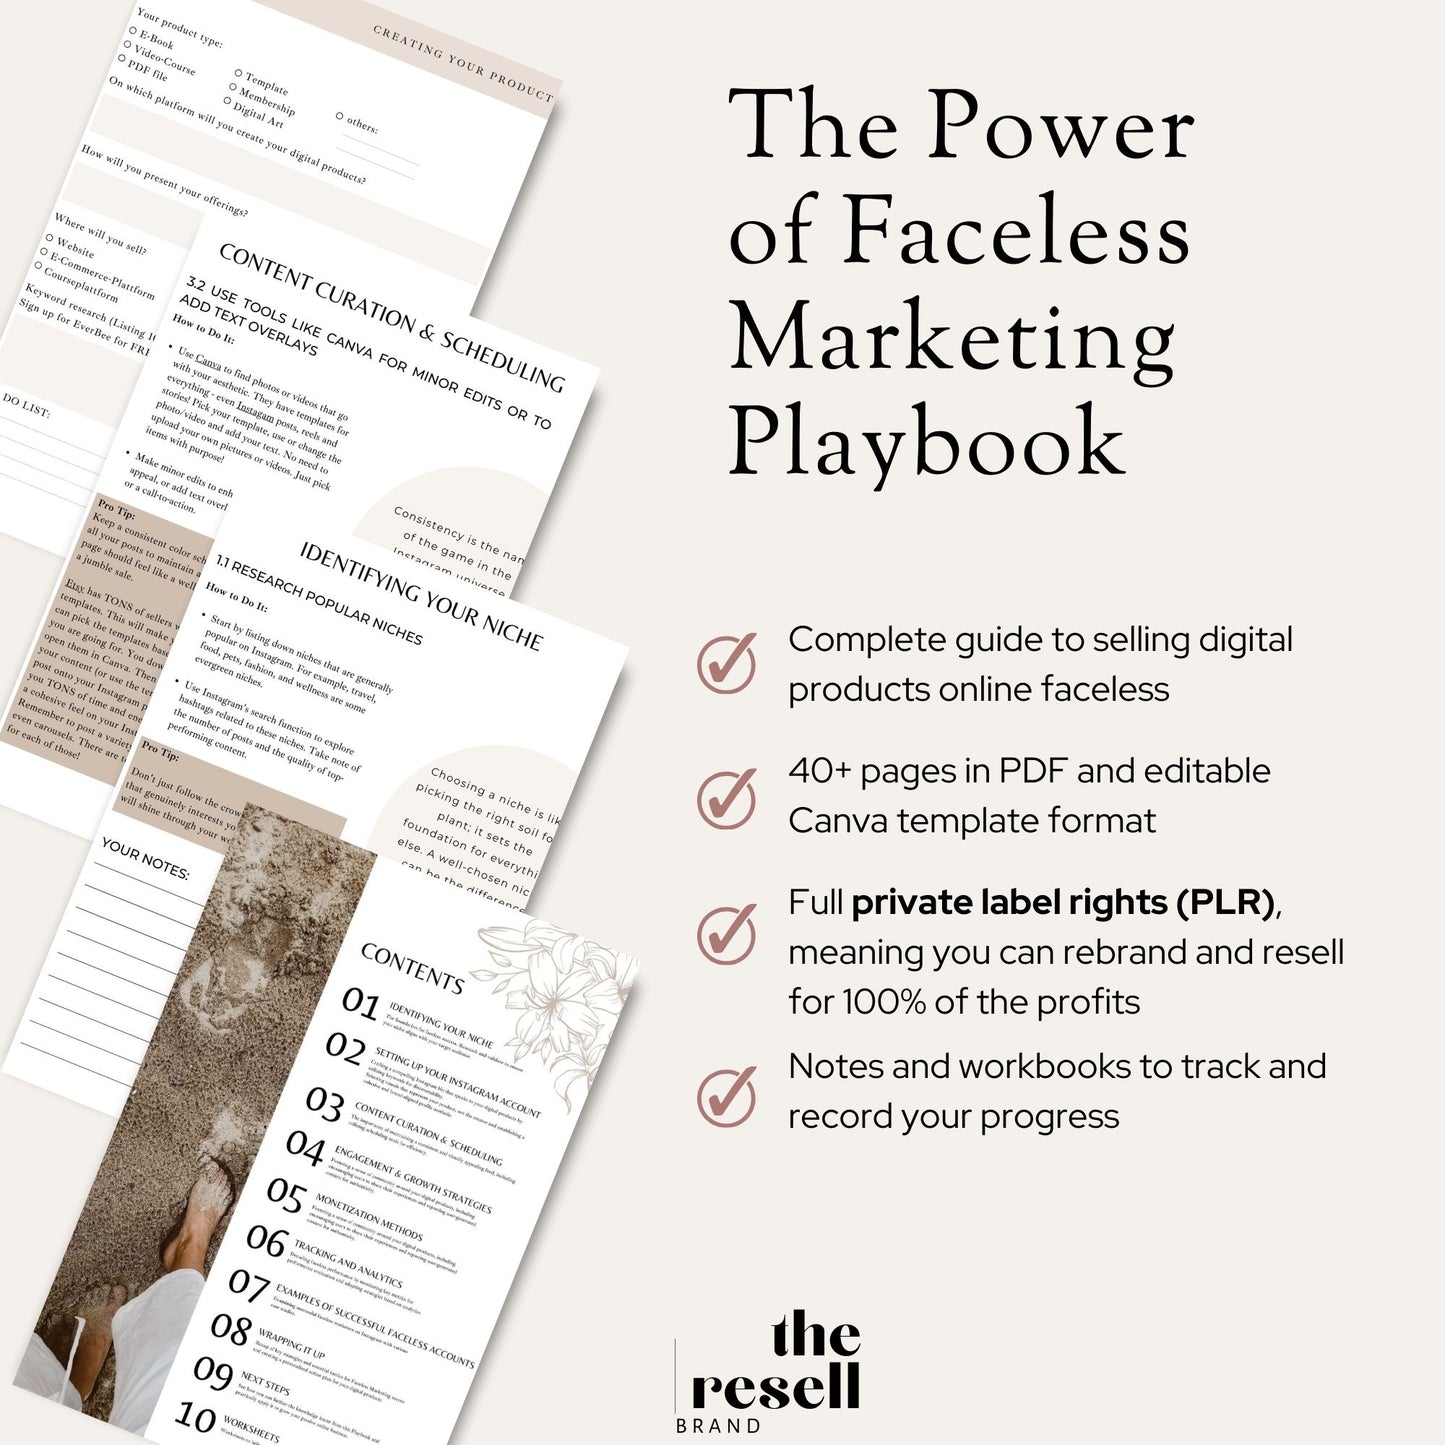 The Power of Faceless Marketing' Playbook | 40+ Pages Digital Marketing Guide | How to Sell Digital Products Online | Master Resell Rights (MRR)| PLR | Canva Editable eBook